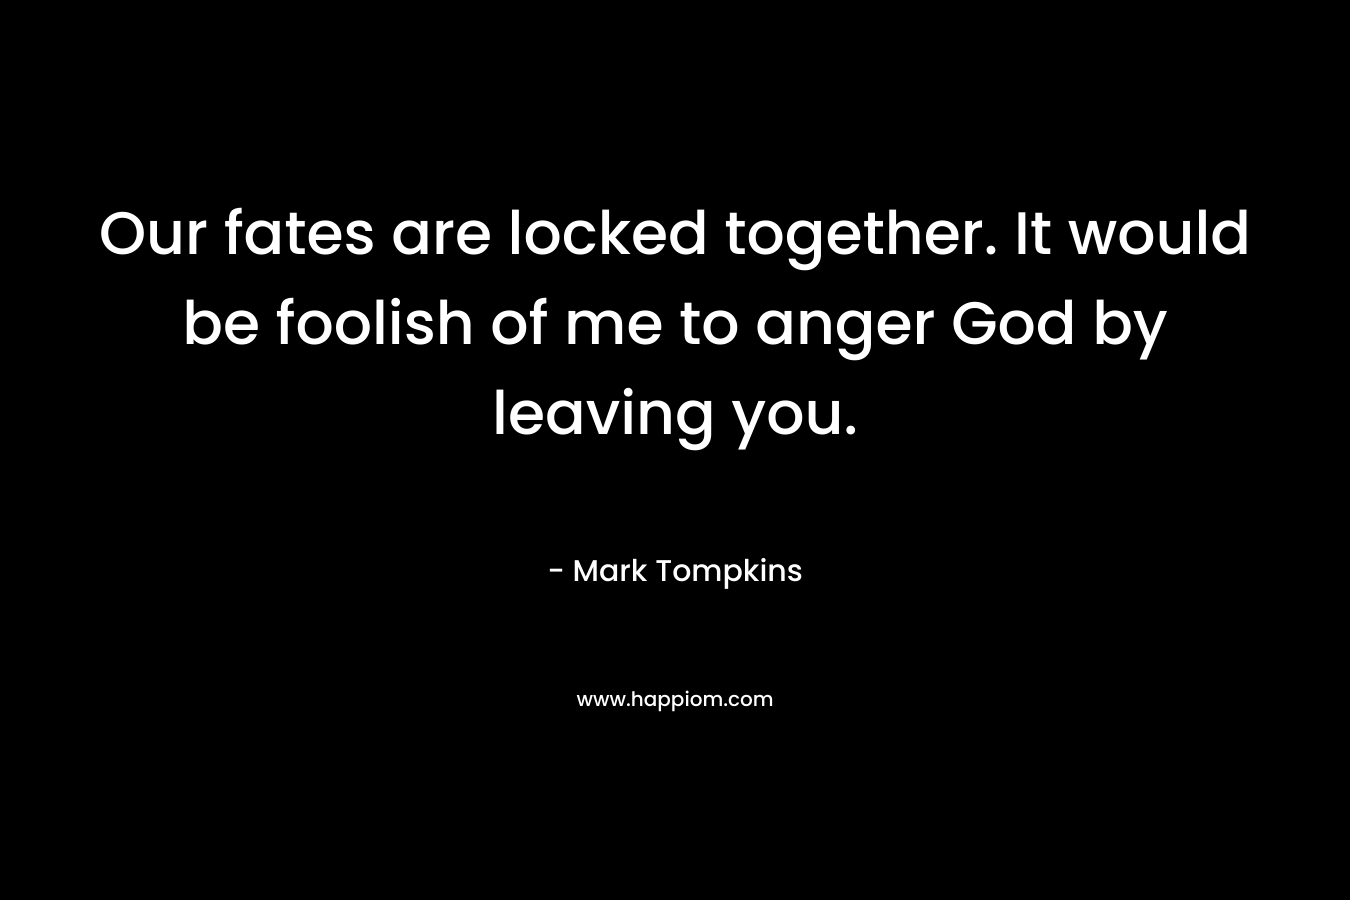 Our fates are locked together. It would be foolish of me to anger God by leaving you. – Mark Tompkins